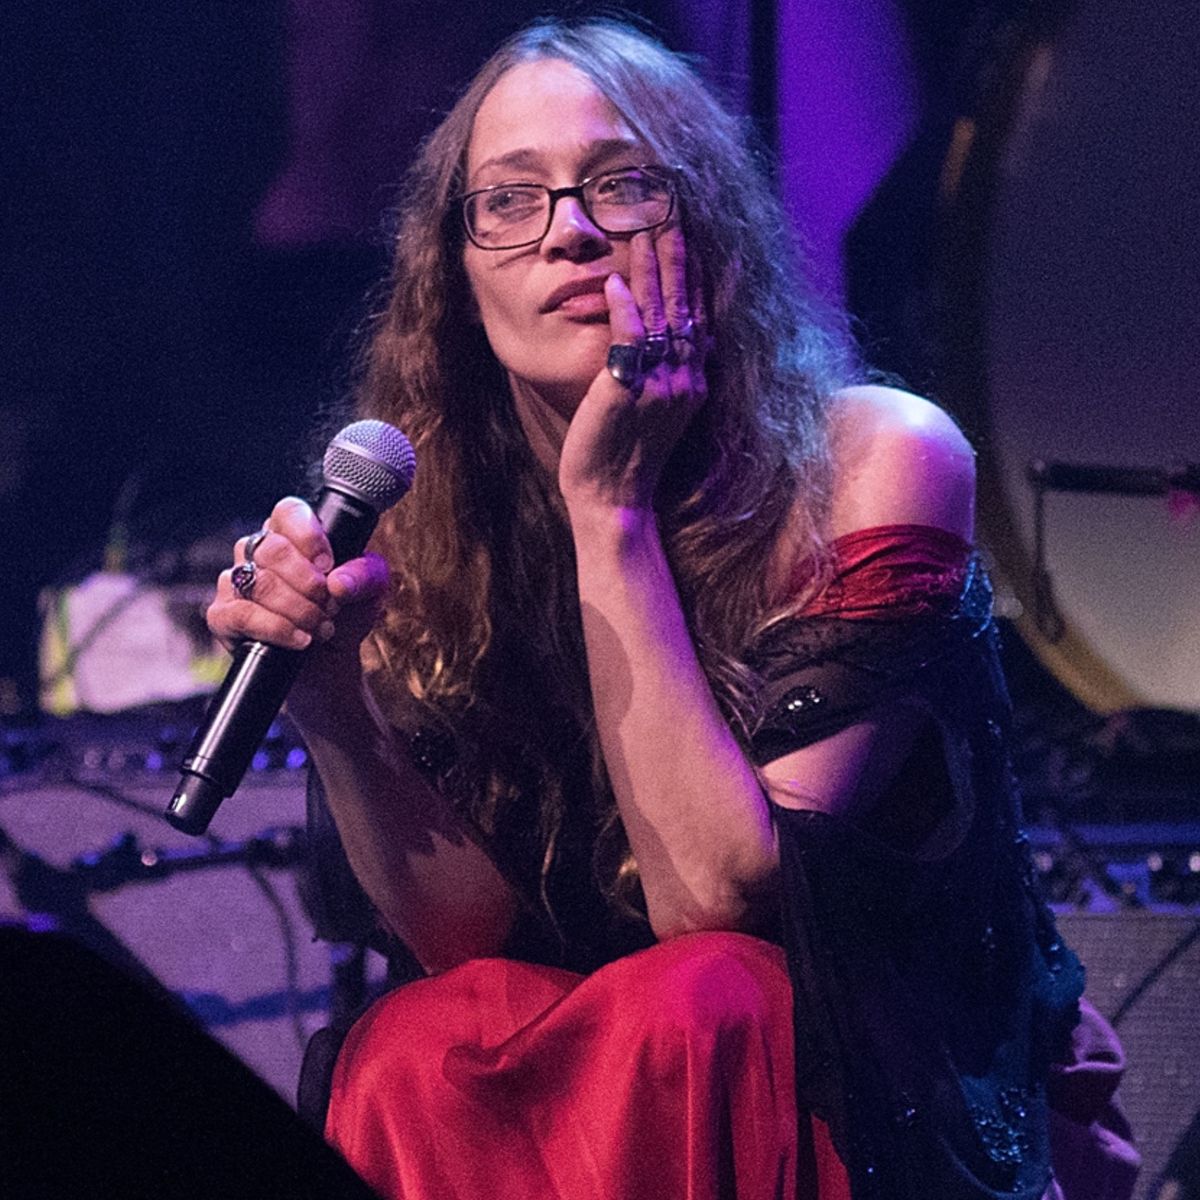 Fiona Apple's New Album Fetch the Bolt Cutters Roars With the Mess of Life